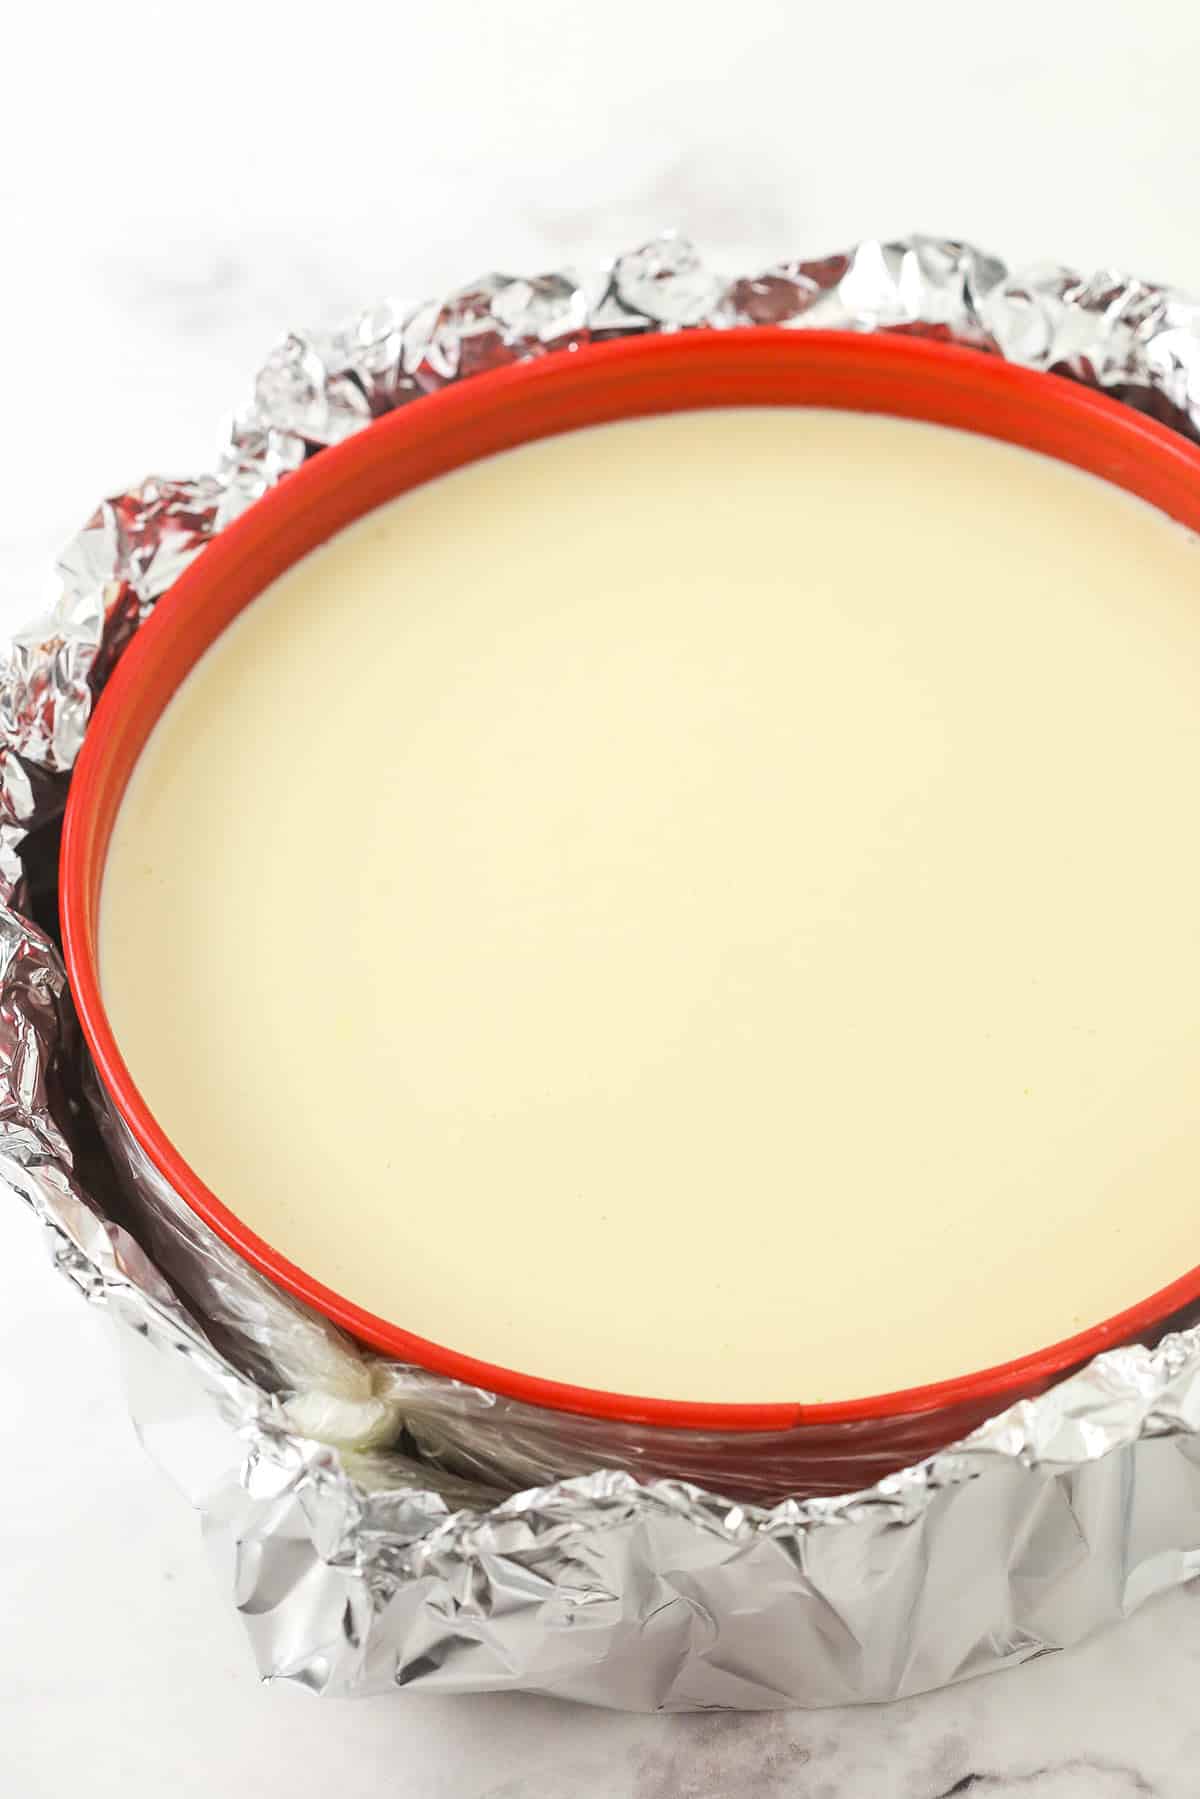 A cheesecake with tin foil around it ready to bake